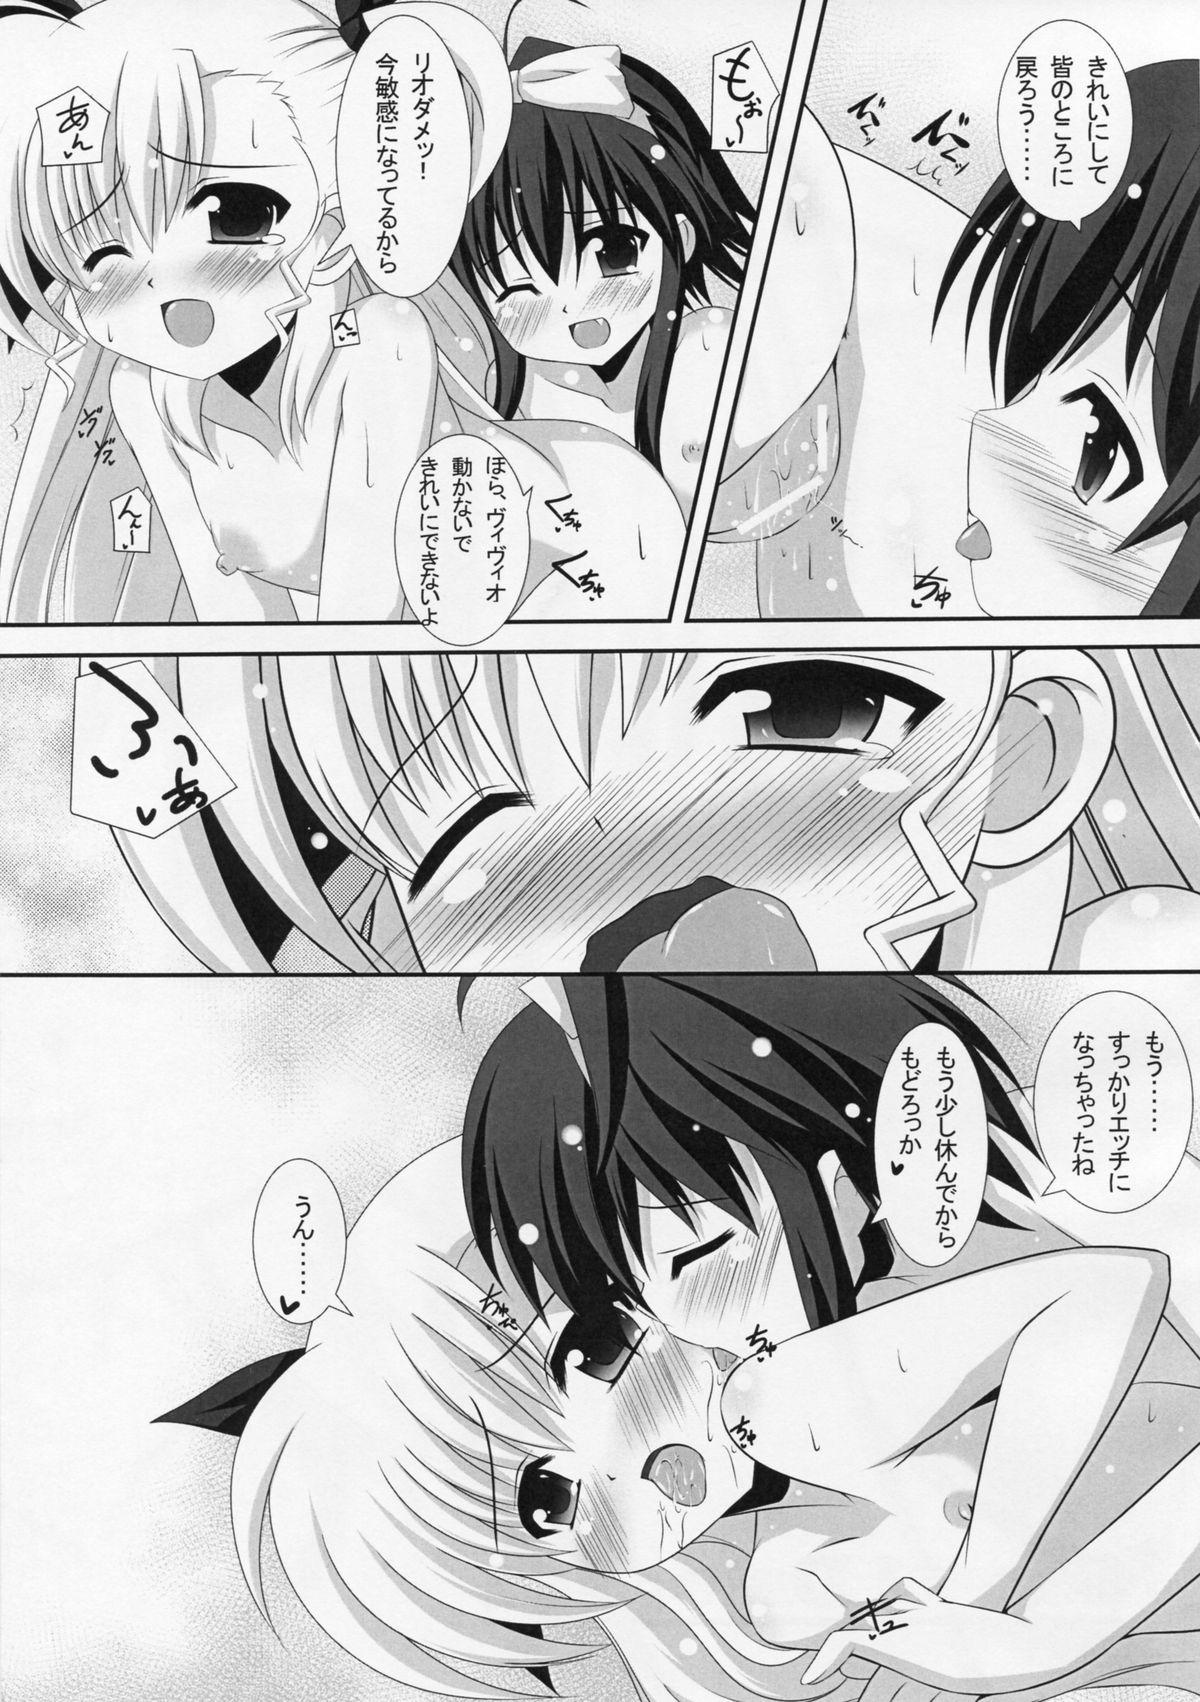 Sexual Drive #02 25